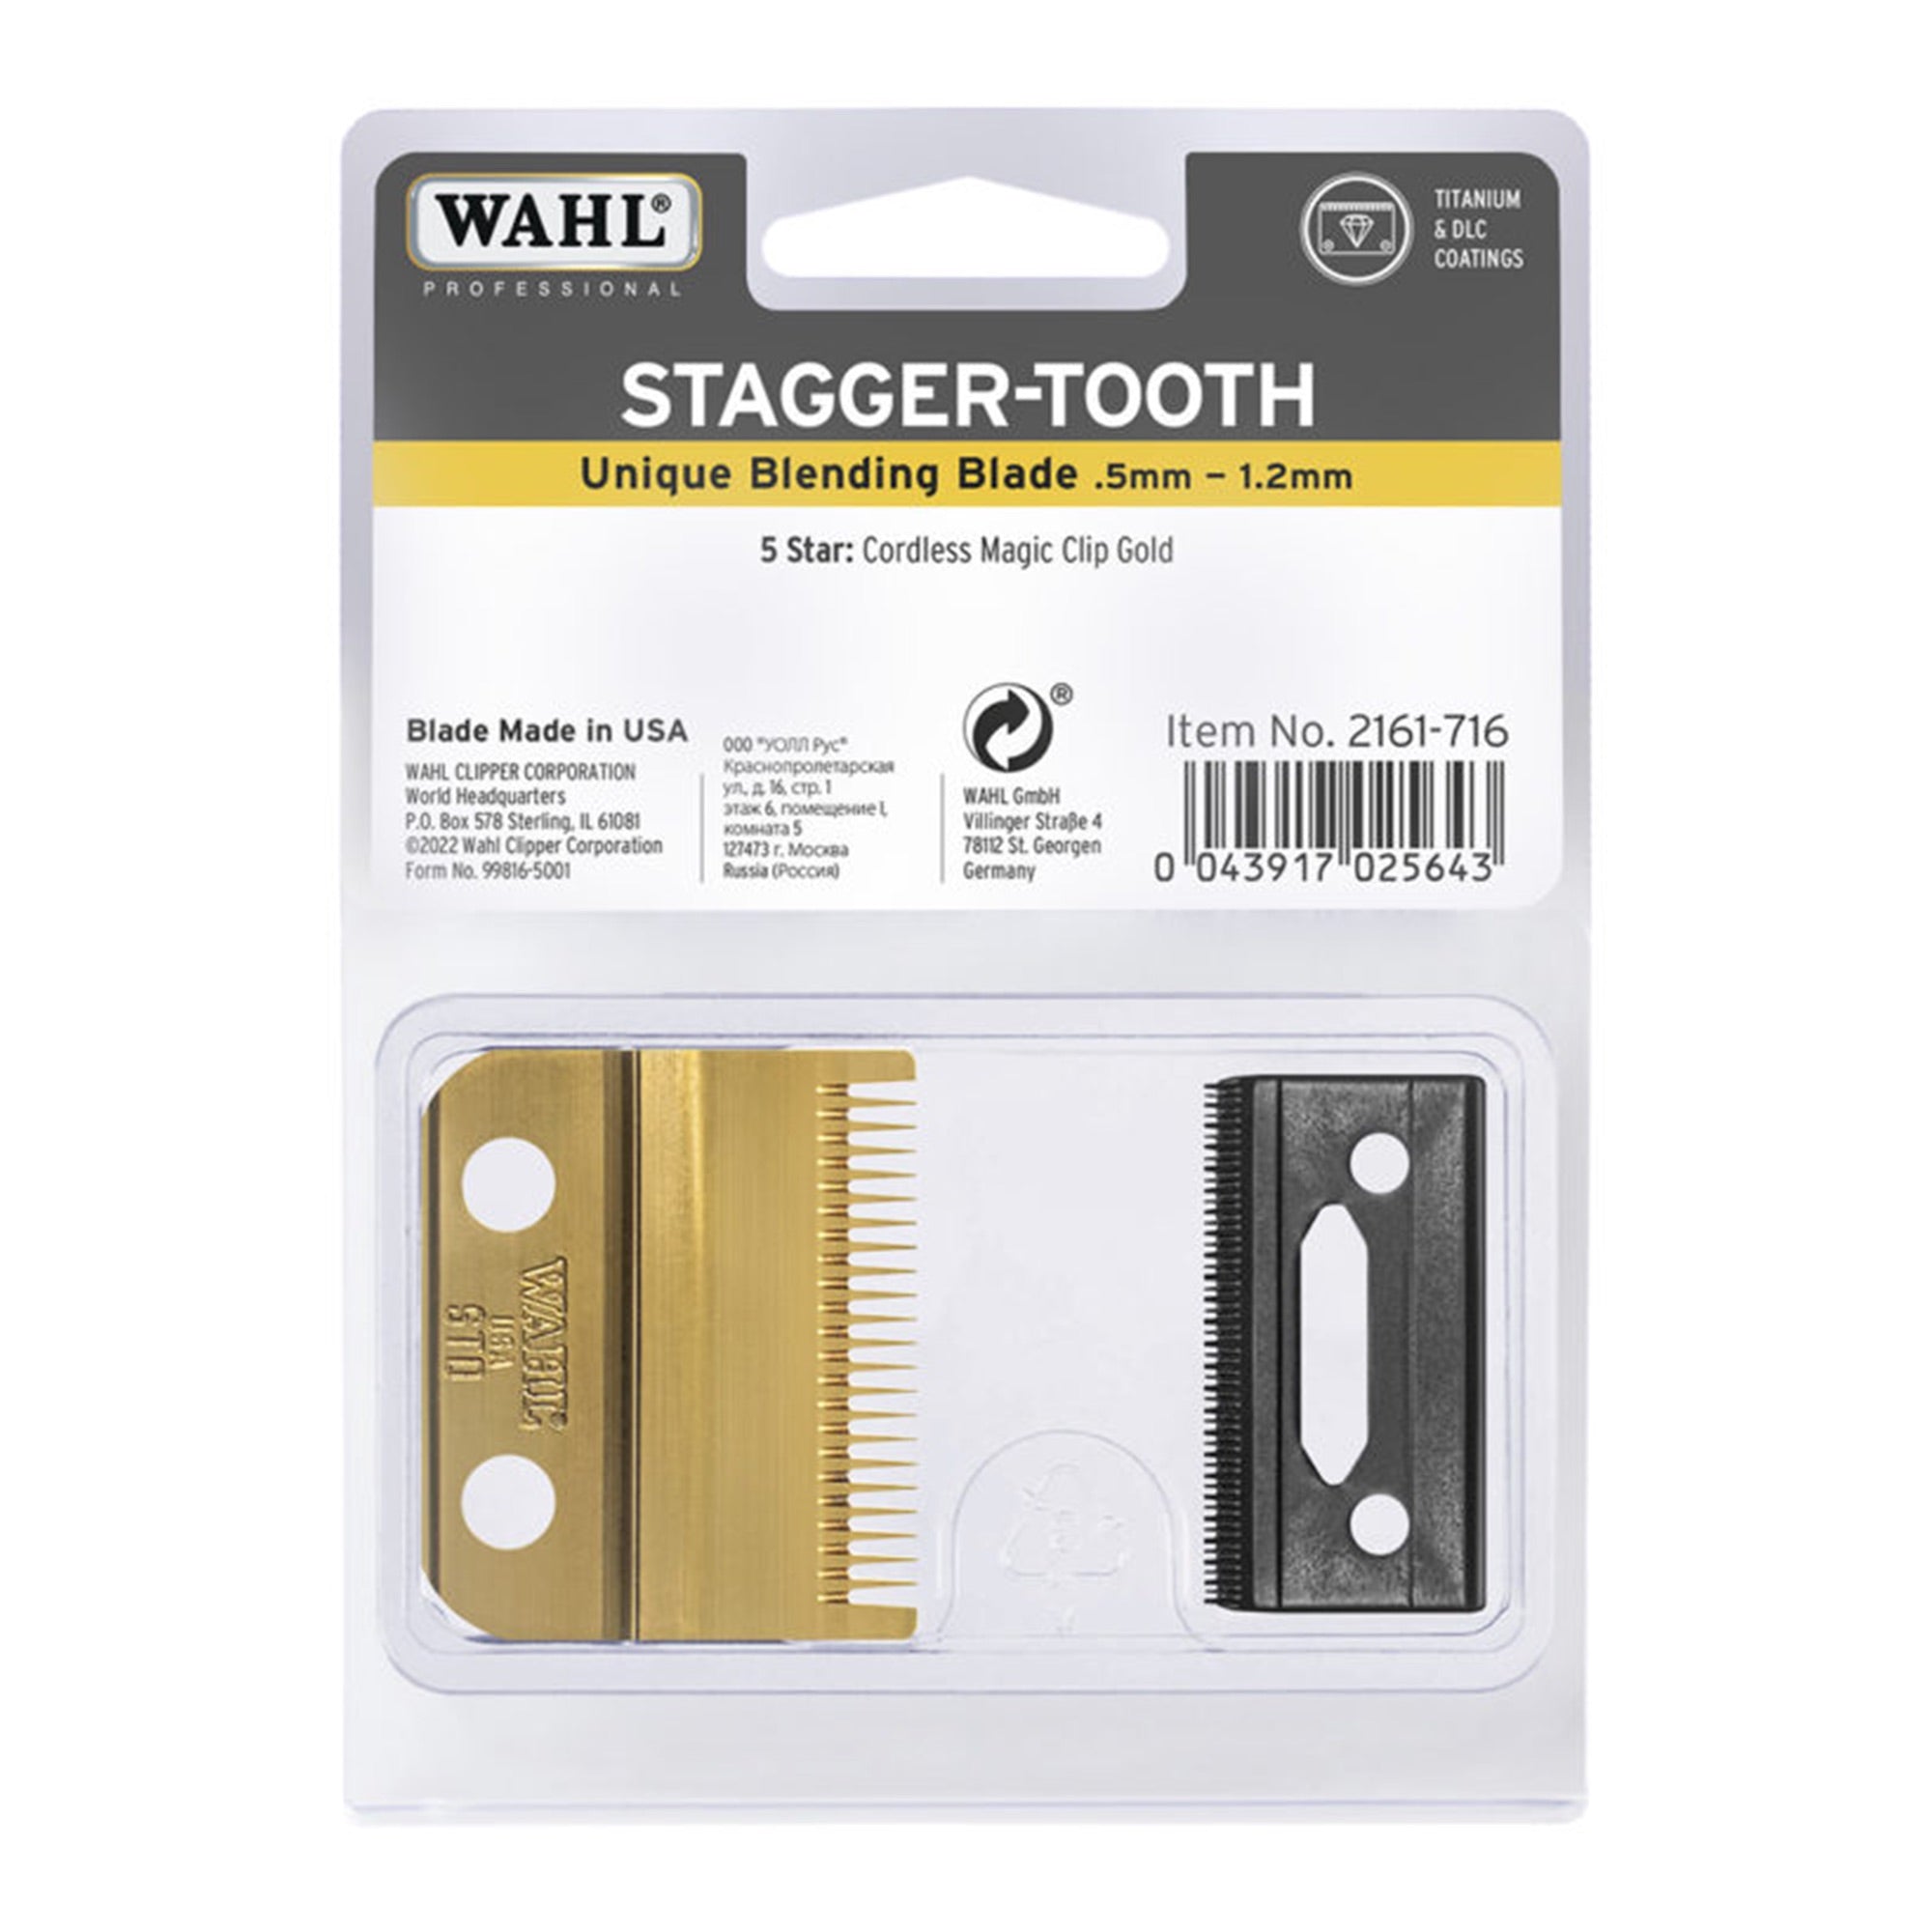 Wahl - Stagger Tooth Unique Blending Blade 2161-716